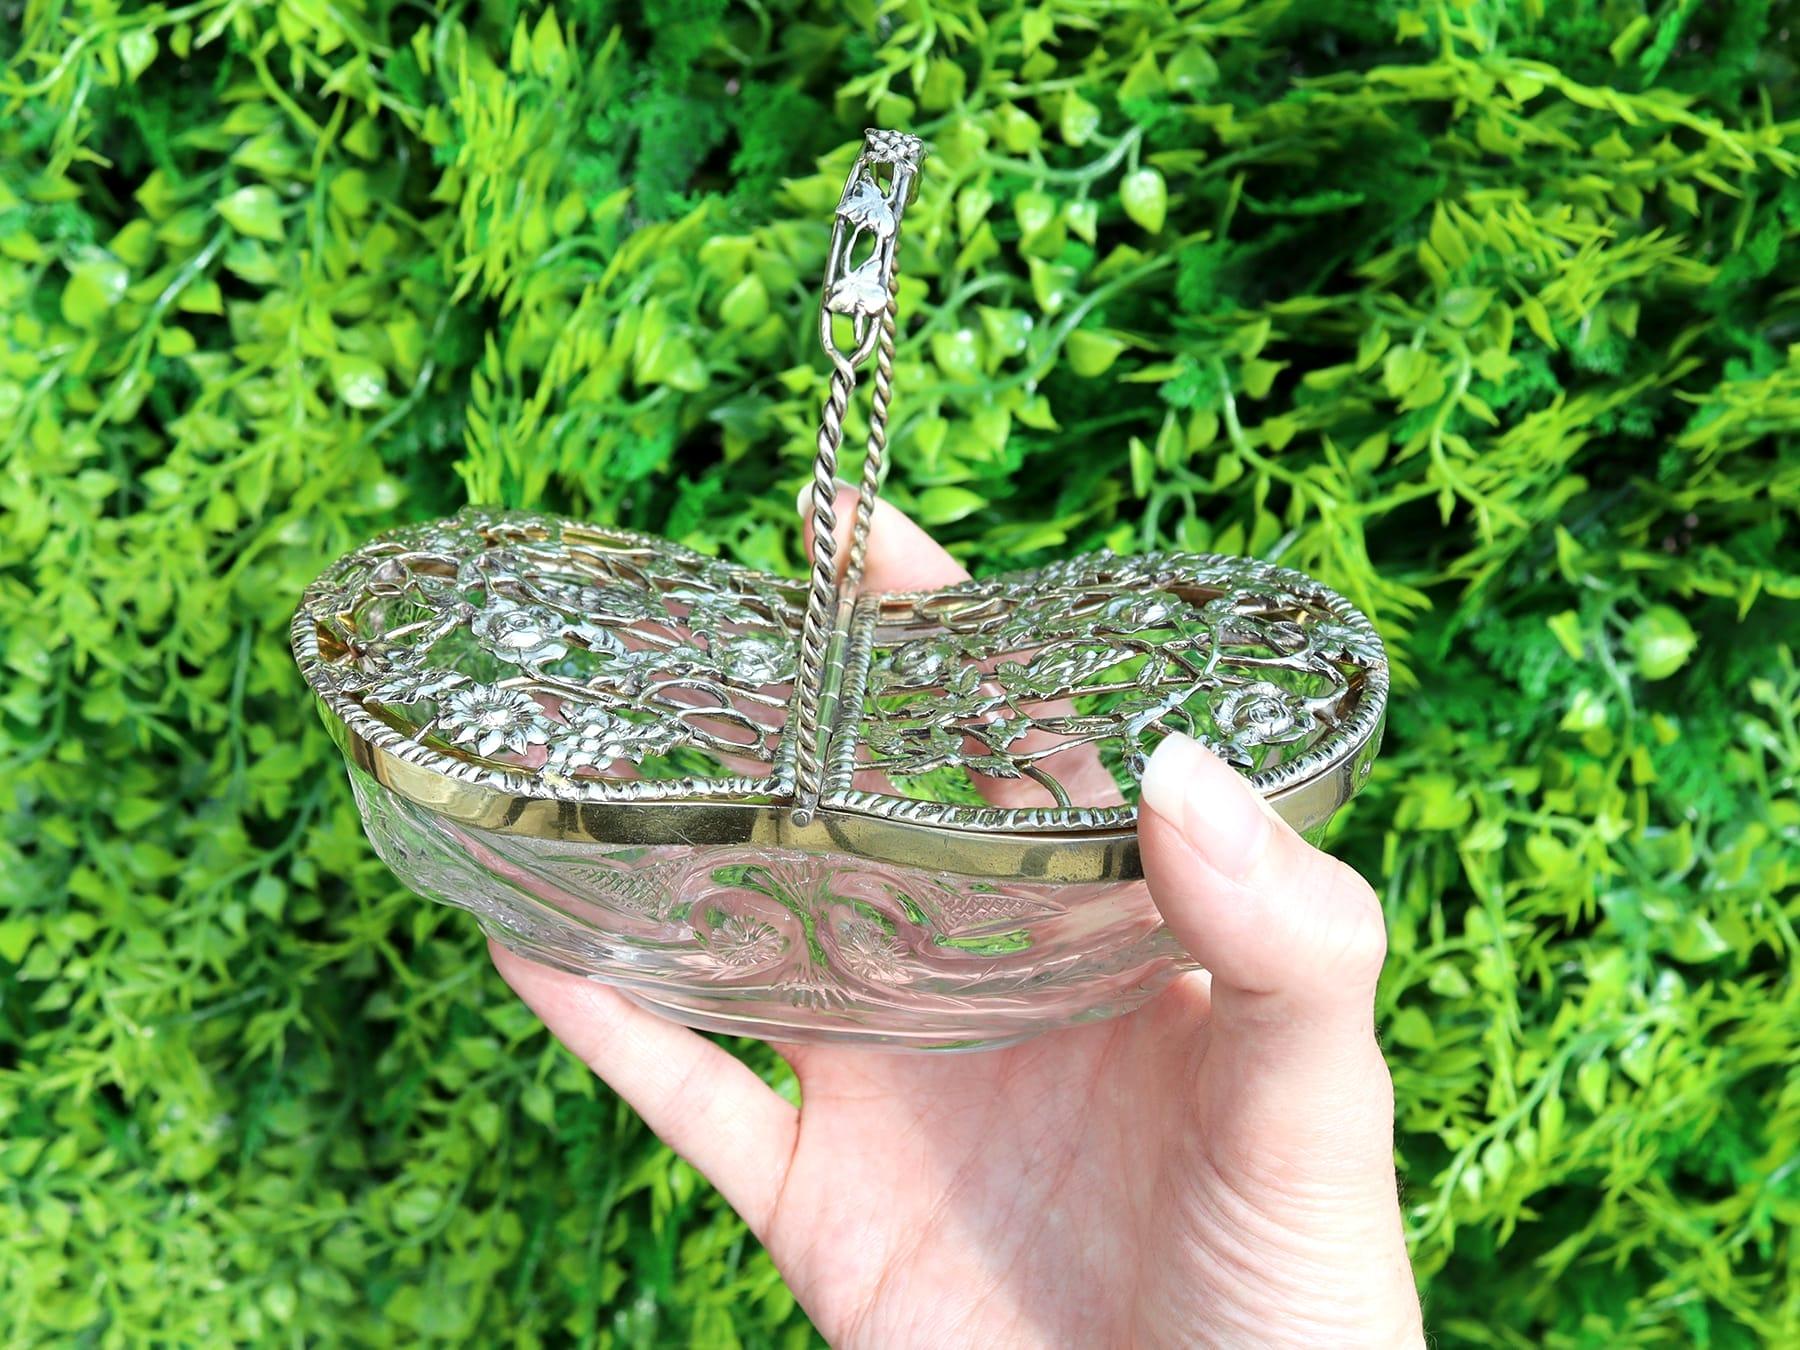 An exceptional, fine and impressive antique Edwardian English sterling silver potpourri basket; an addition to our ornamental silver collection

This exceptional antique Edwardian sterling silver and glass pot pourri basket has an oval rounded